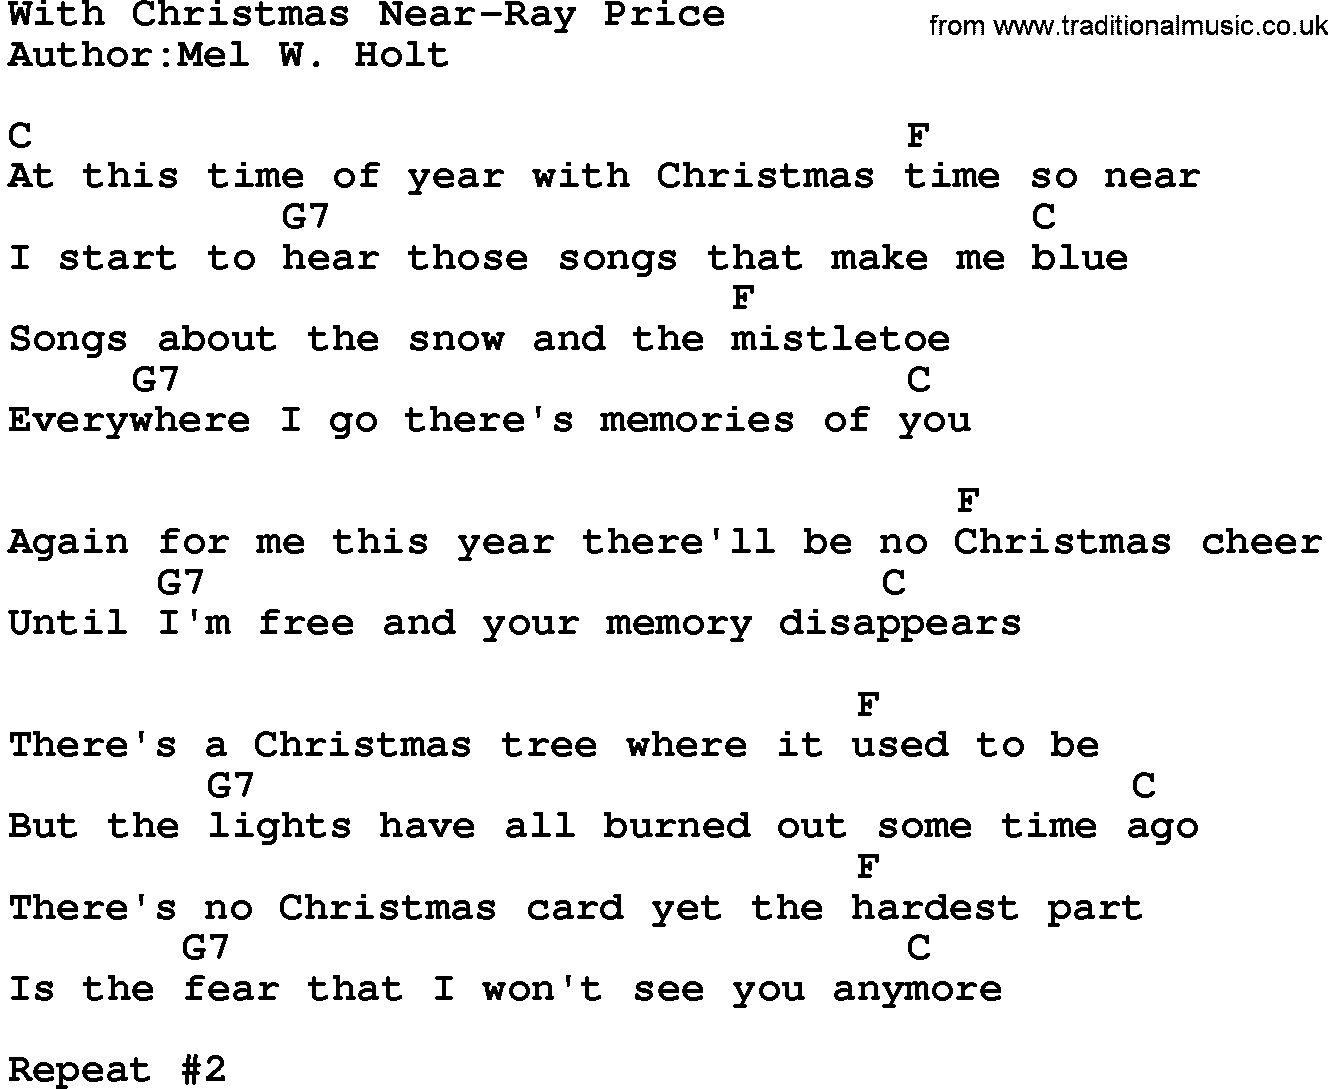 Country music song: With Christmas Near-Ray Price lyrics and chords